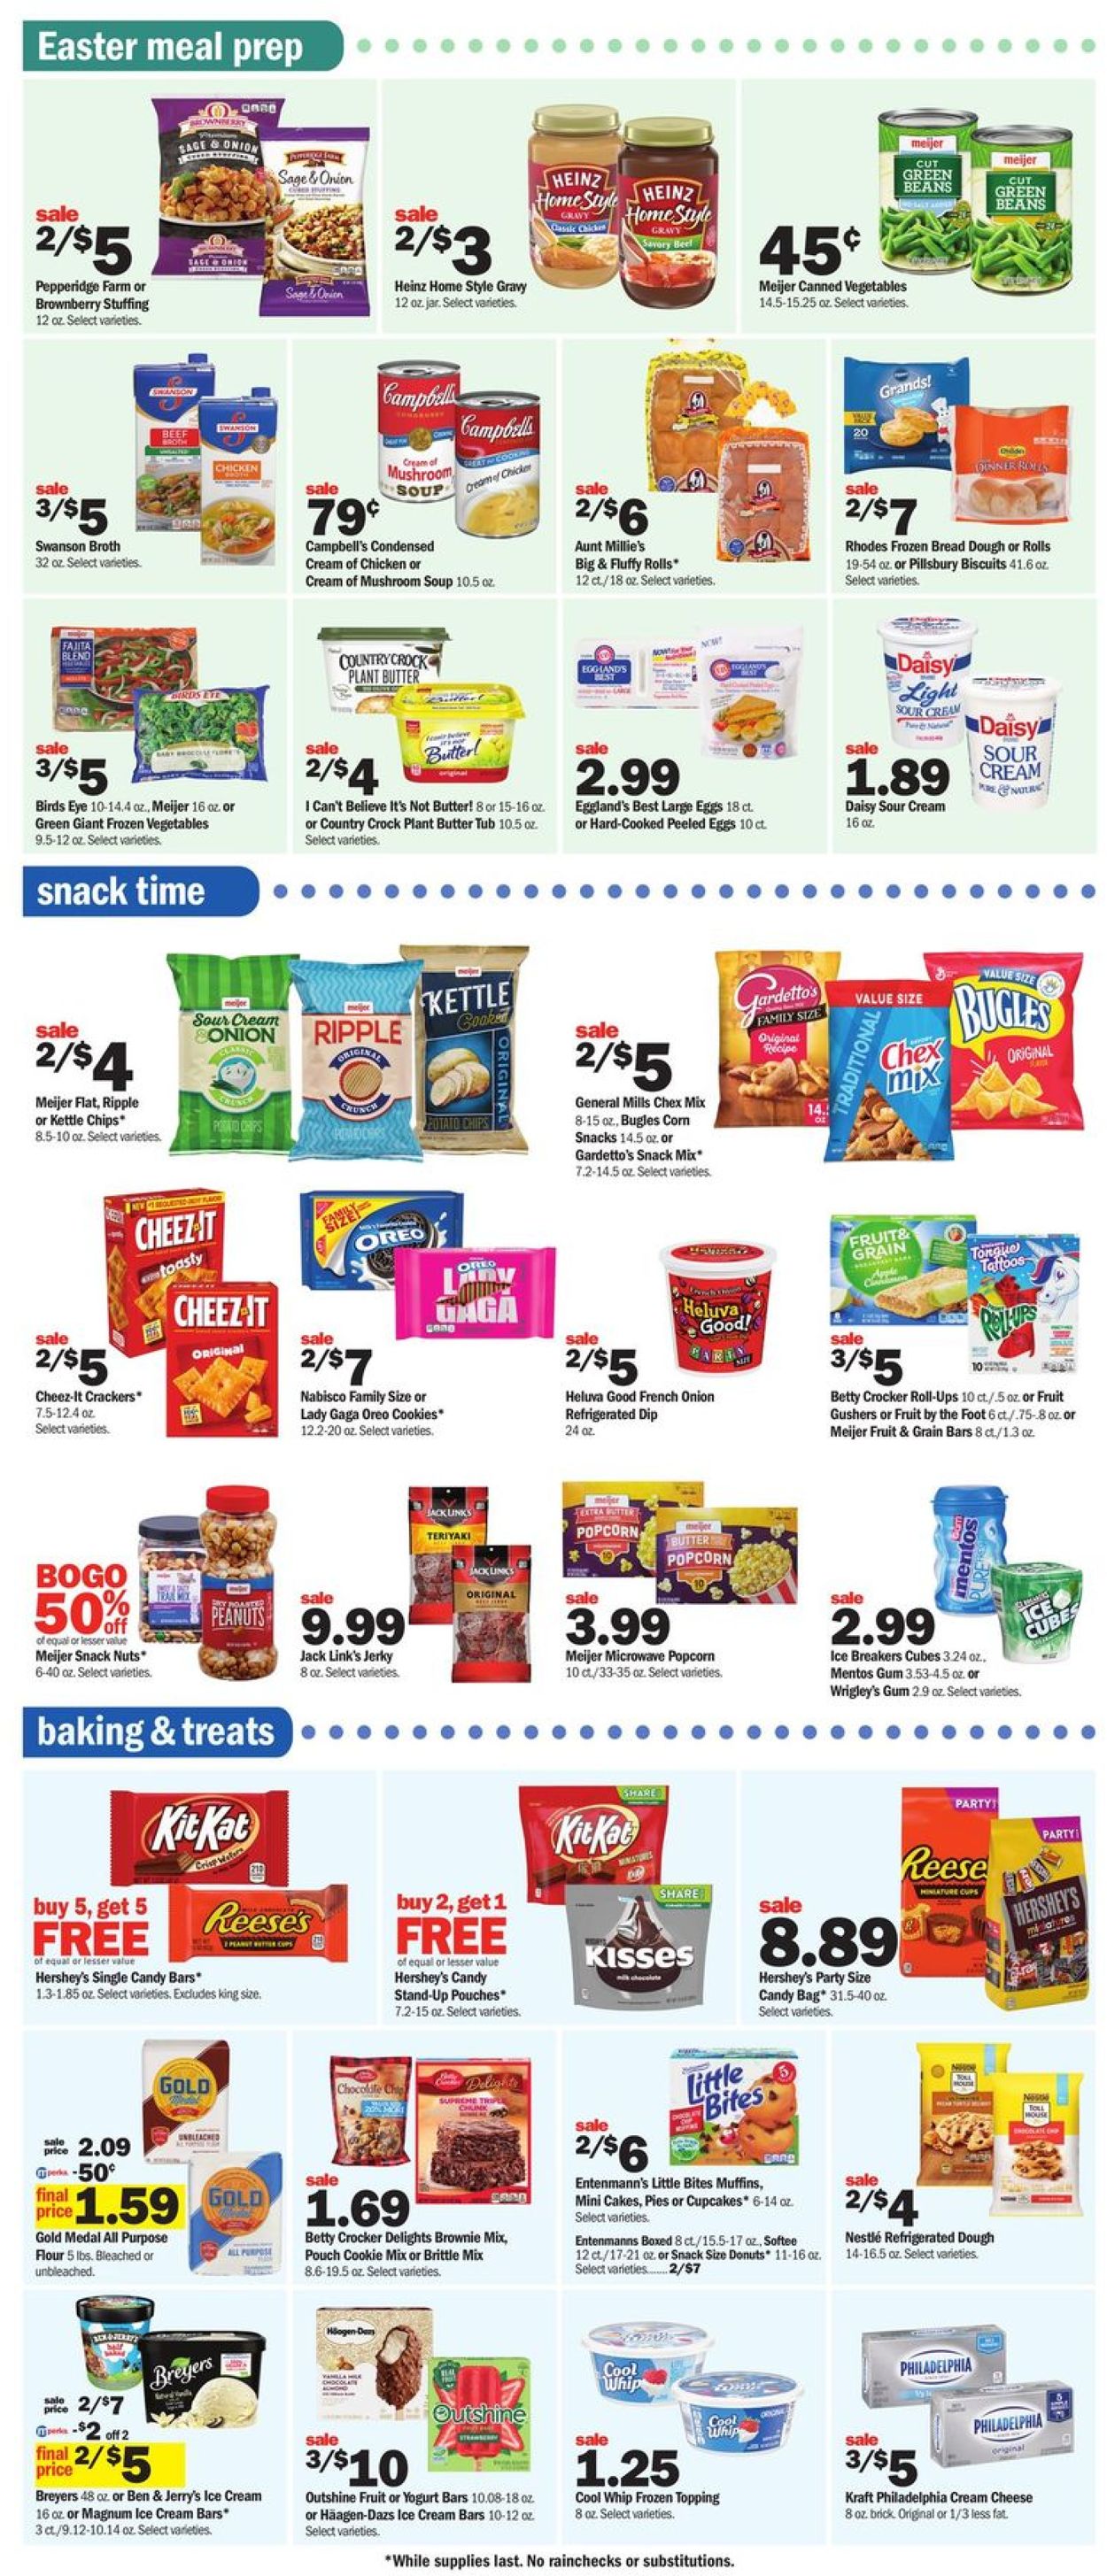 Meijer - Easter 2021 Ad Weekly Ad Circular - valid 03/21-03/27/2021 (Page 4)